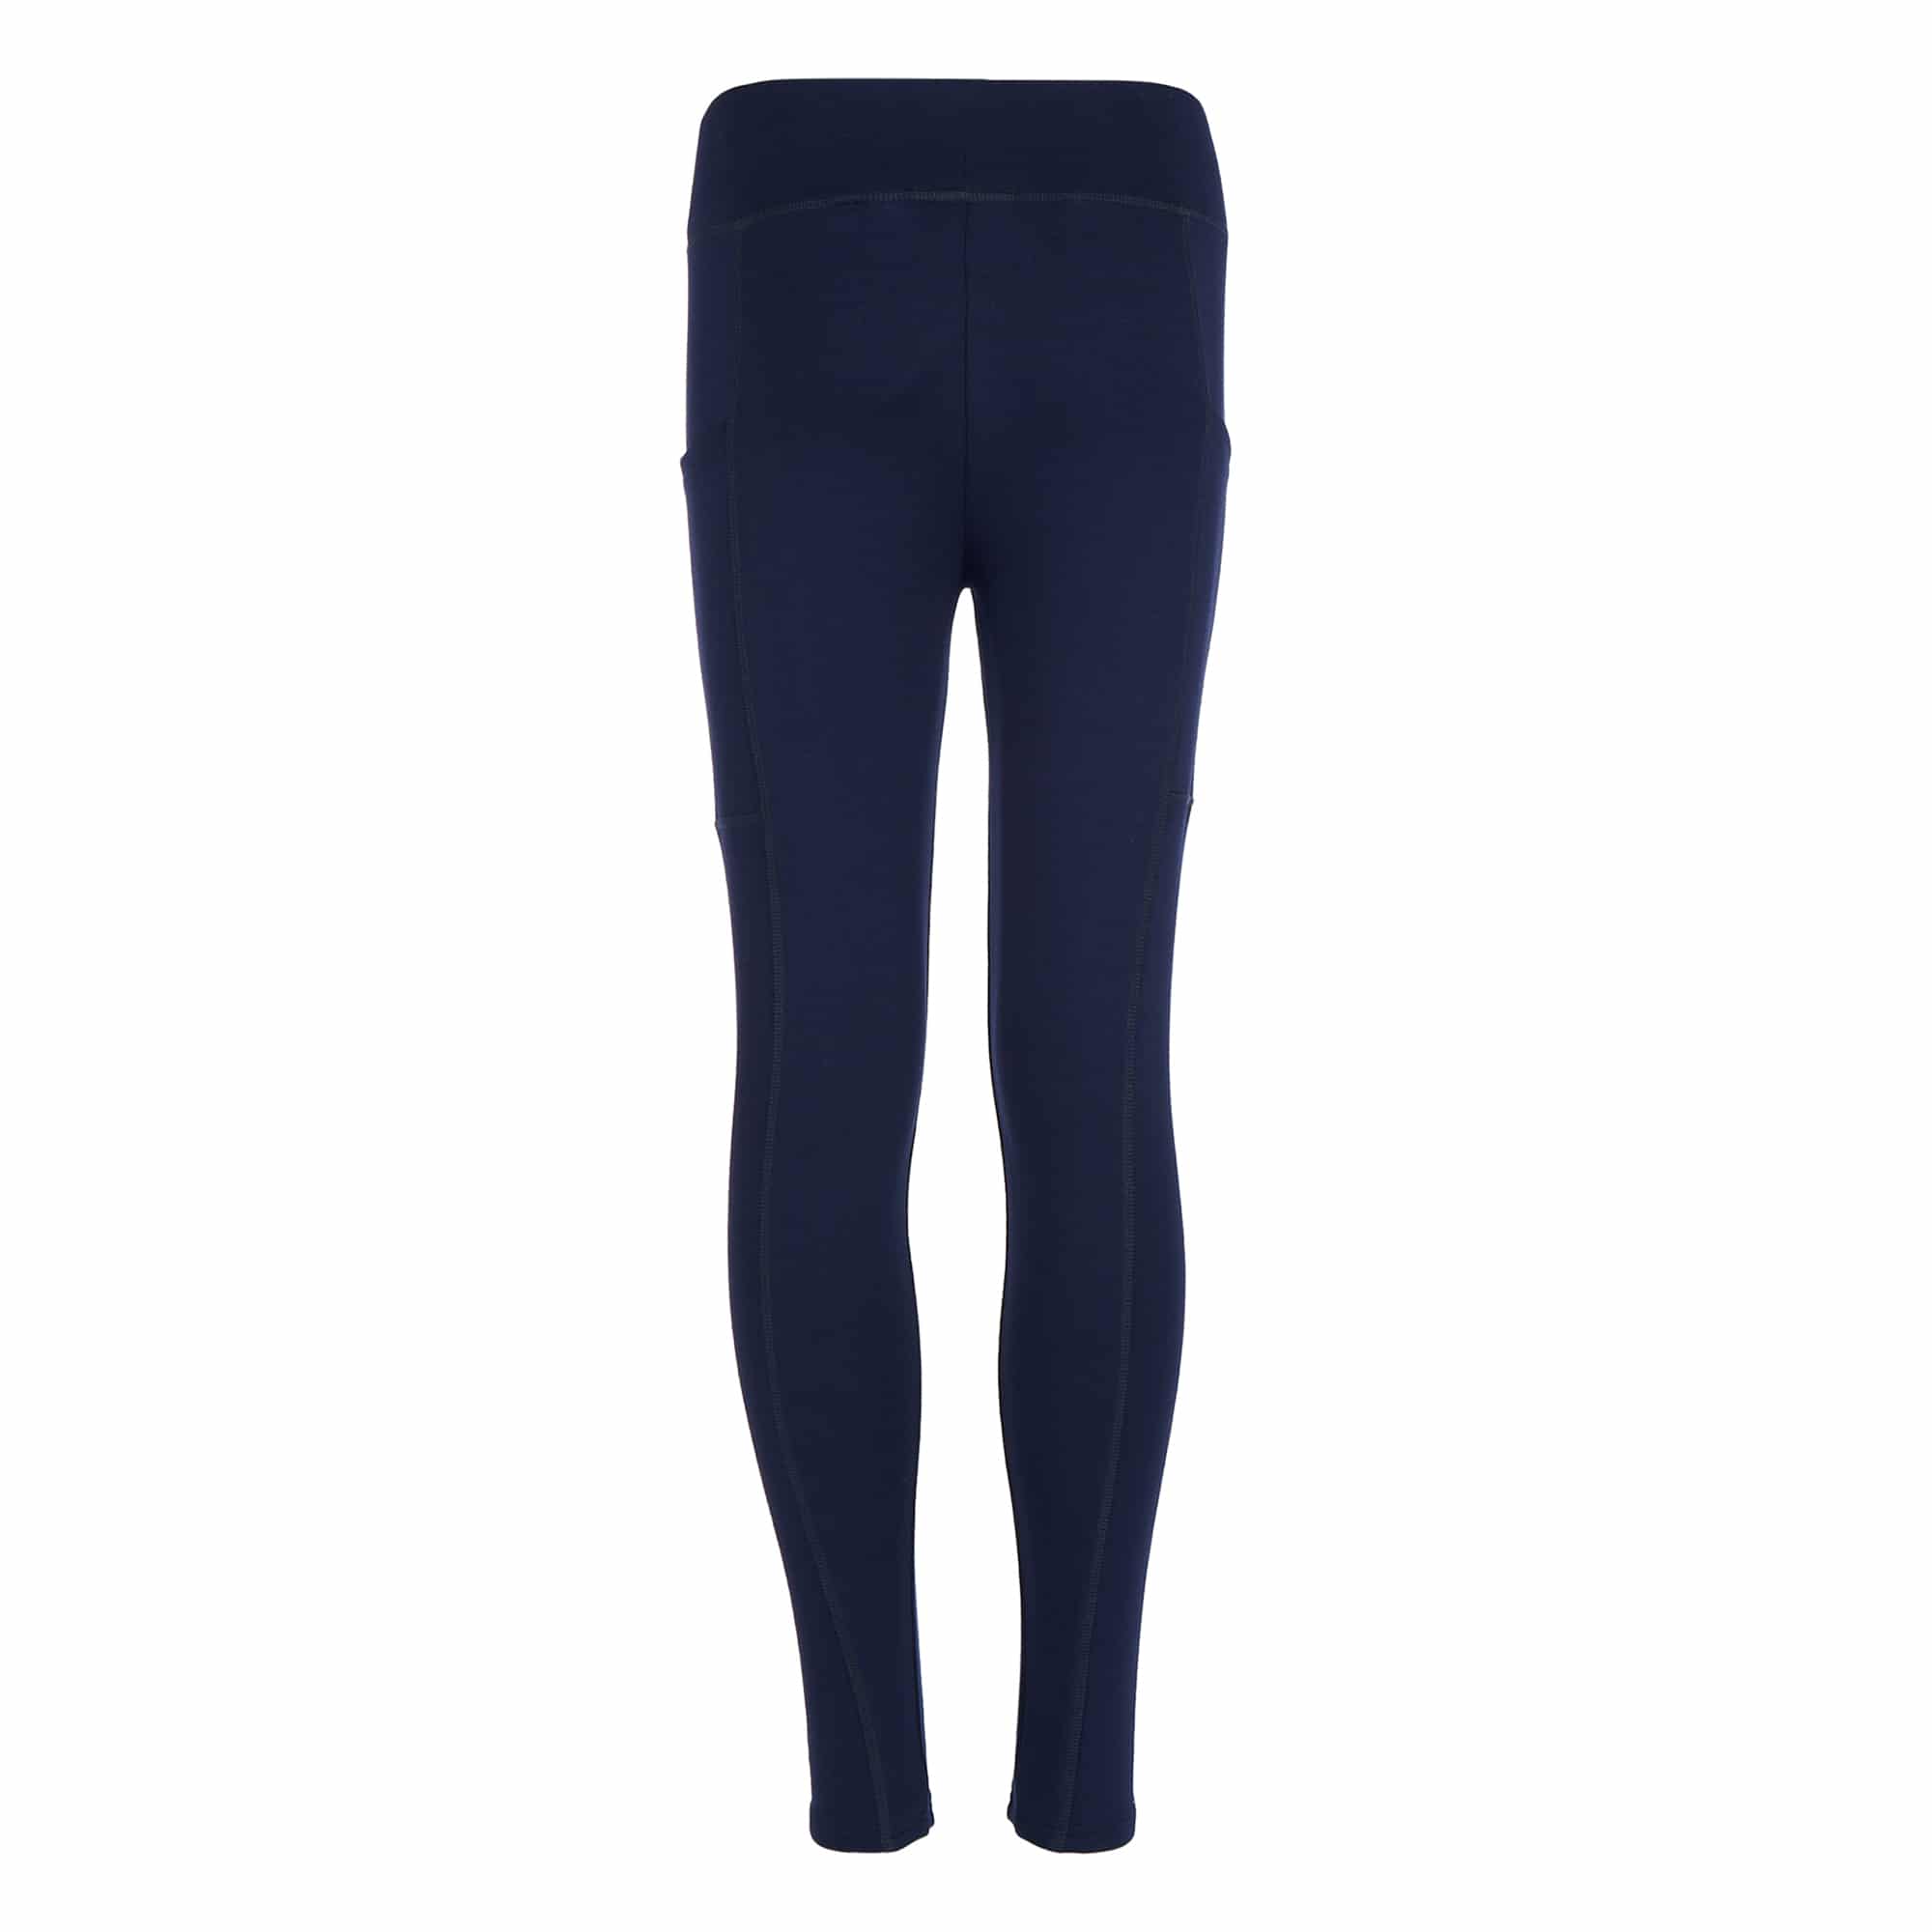 juicy couture girls navy leggings front view